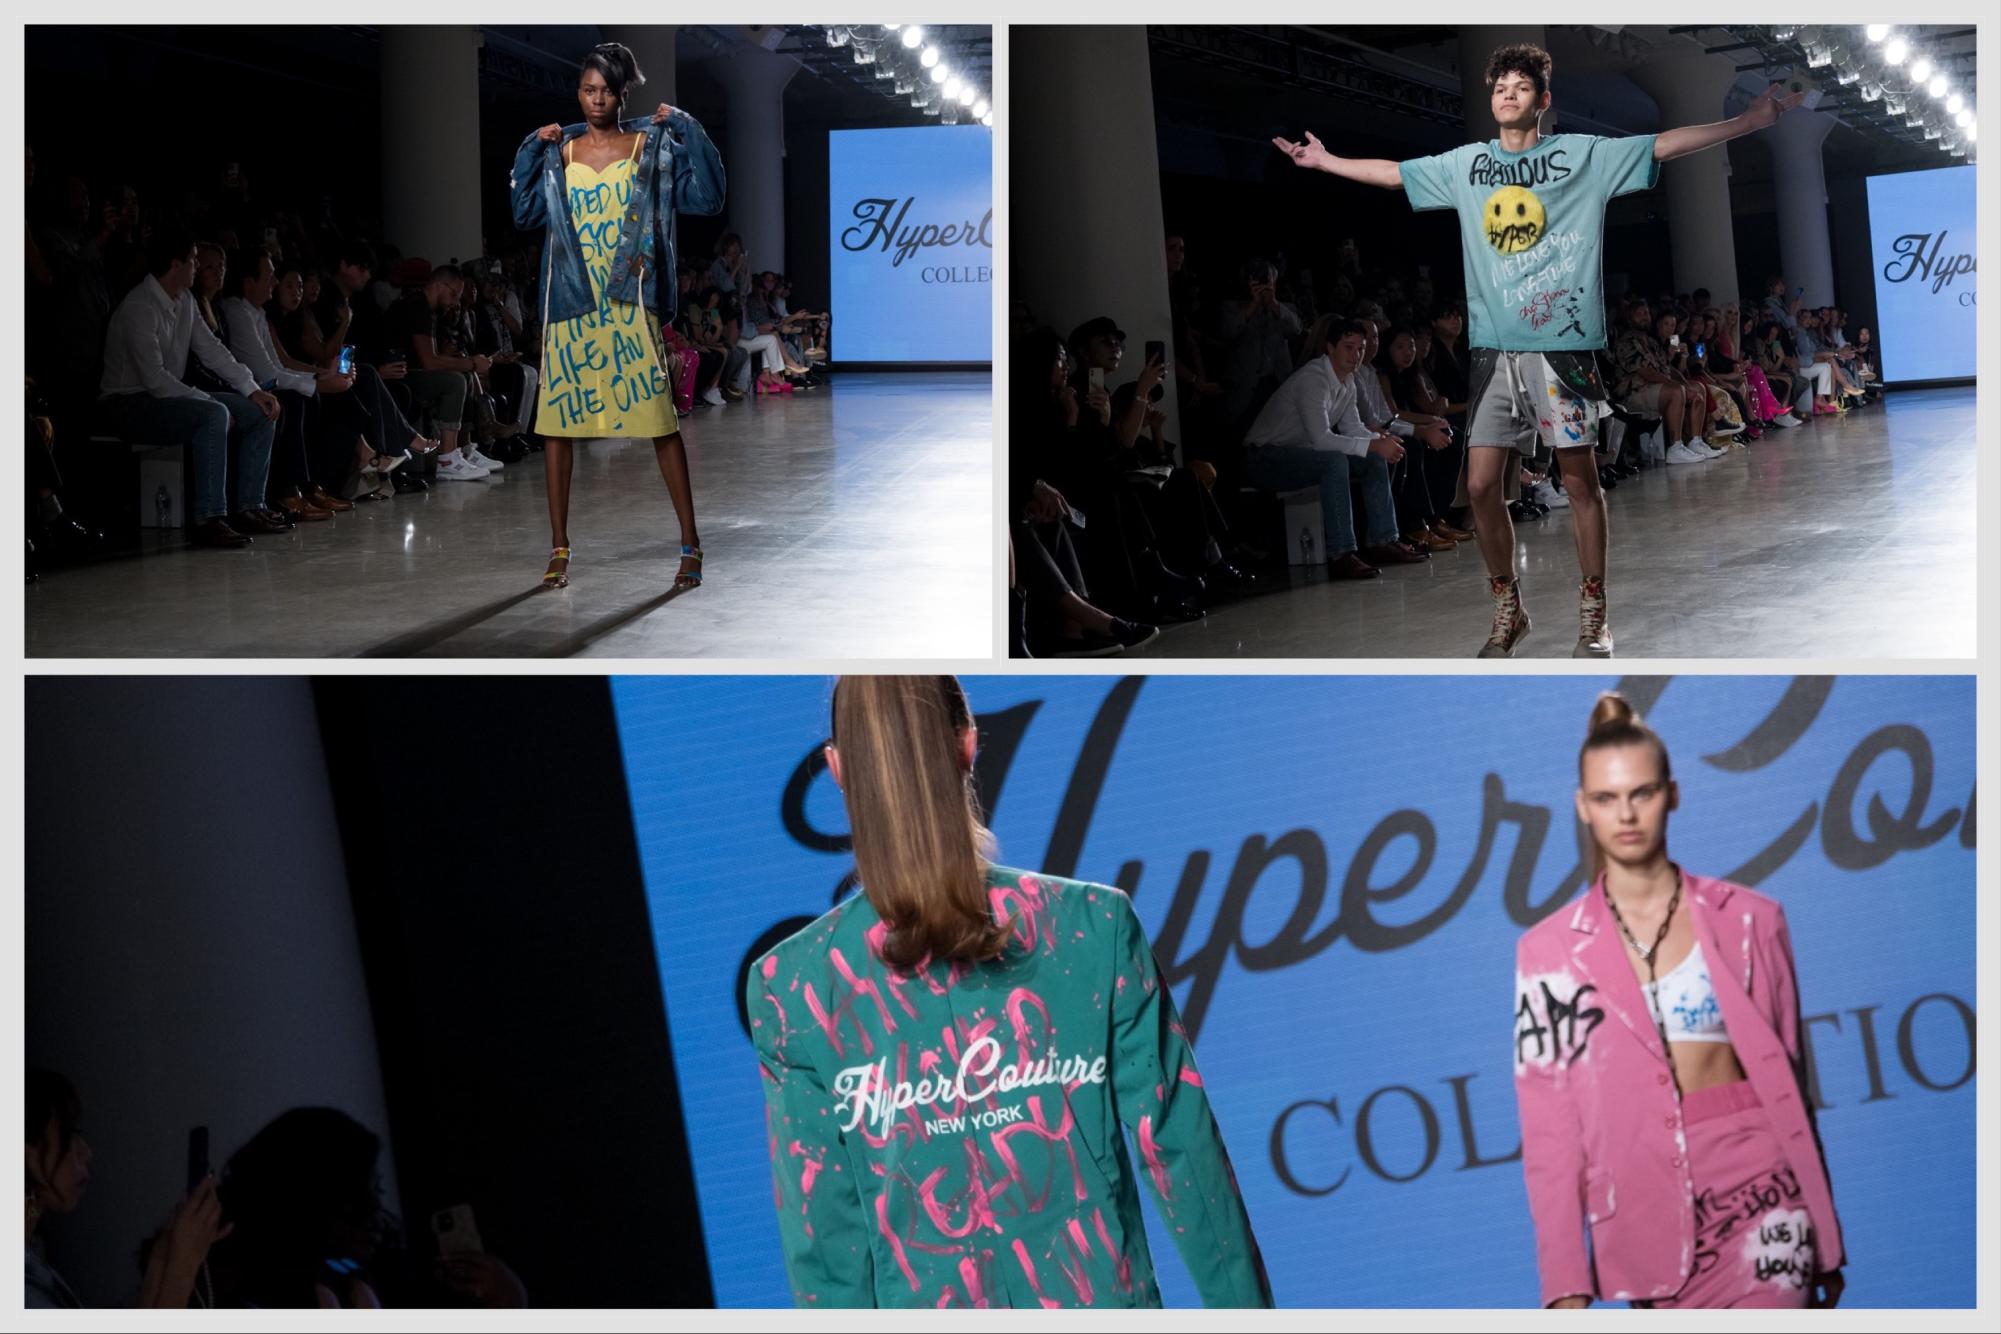 From top to bottom and left to right: a model wearing a yellow printed dress and a blue denim jacket; a model wearing a light blue graphic t-shirt and a pair of gray-and-black spray-painted shorts; two modelings wearing a cyan and pink blazers.